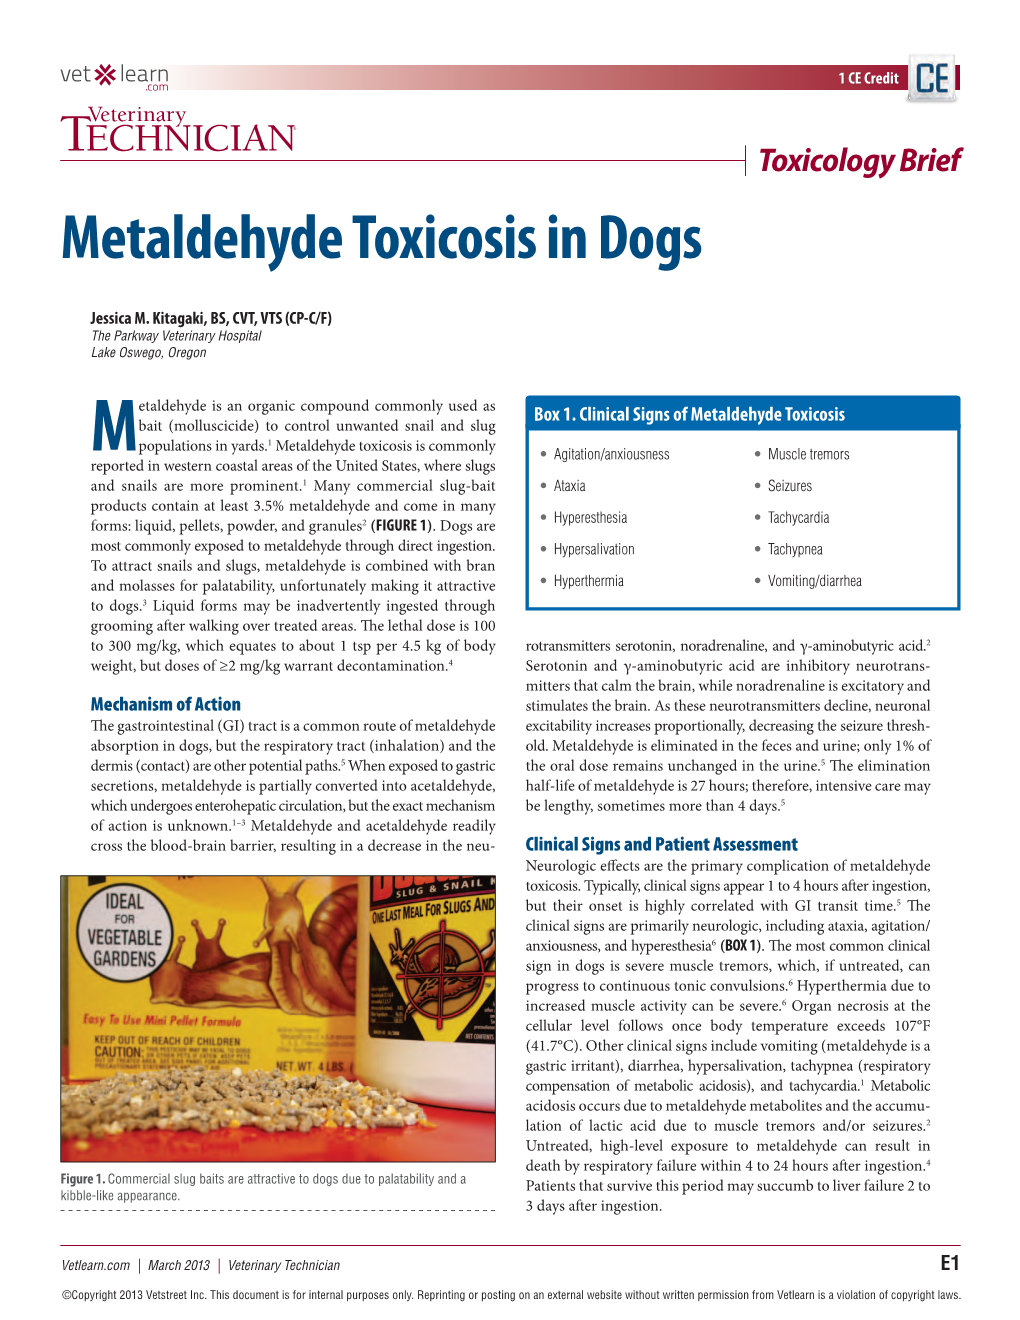 Metaldehyde Toxicosis in Dogs